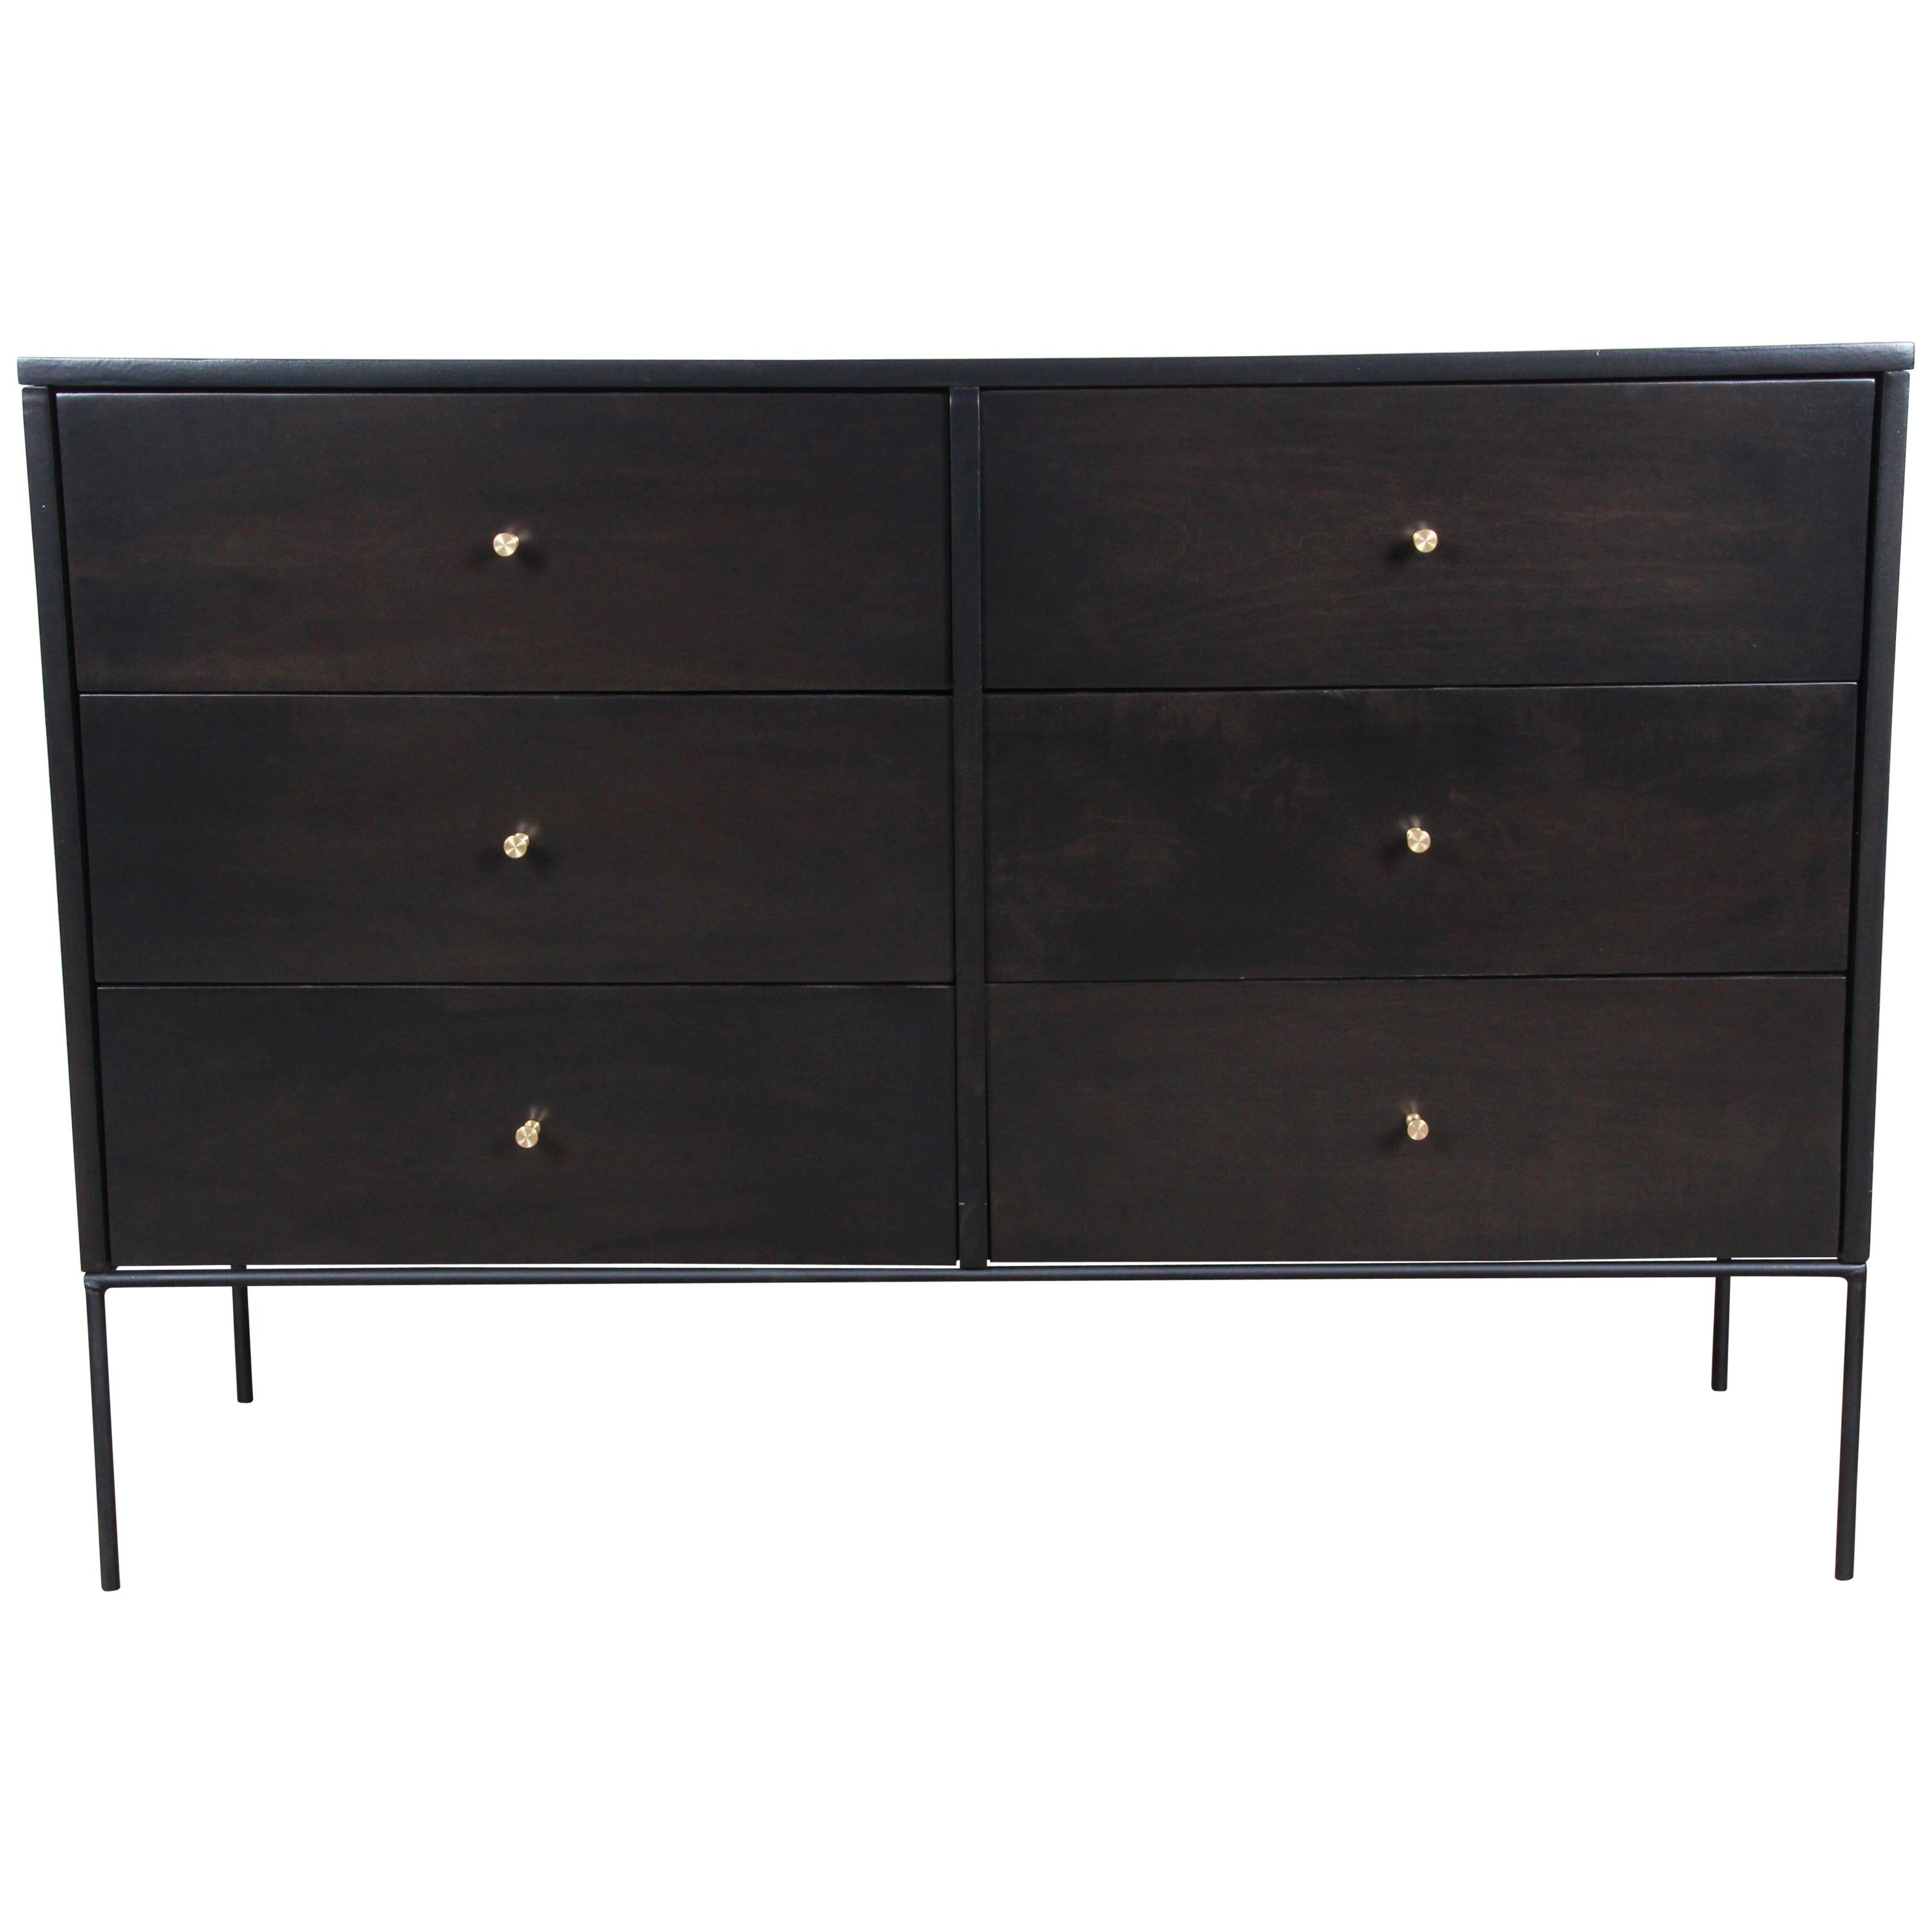 Paul Mccobb Planner Group Iron Base Ebonized Six Drawer Dresser Or Credenza With Regard To Line Geo Credenzas (View 9 of 30)